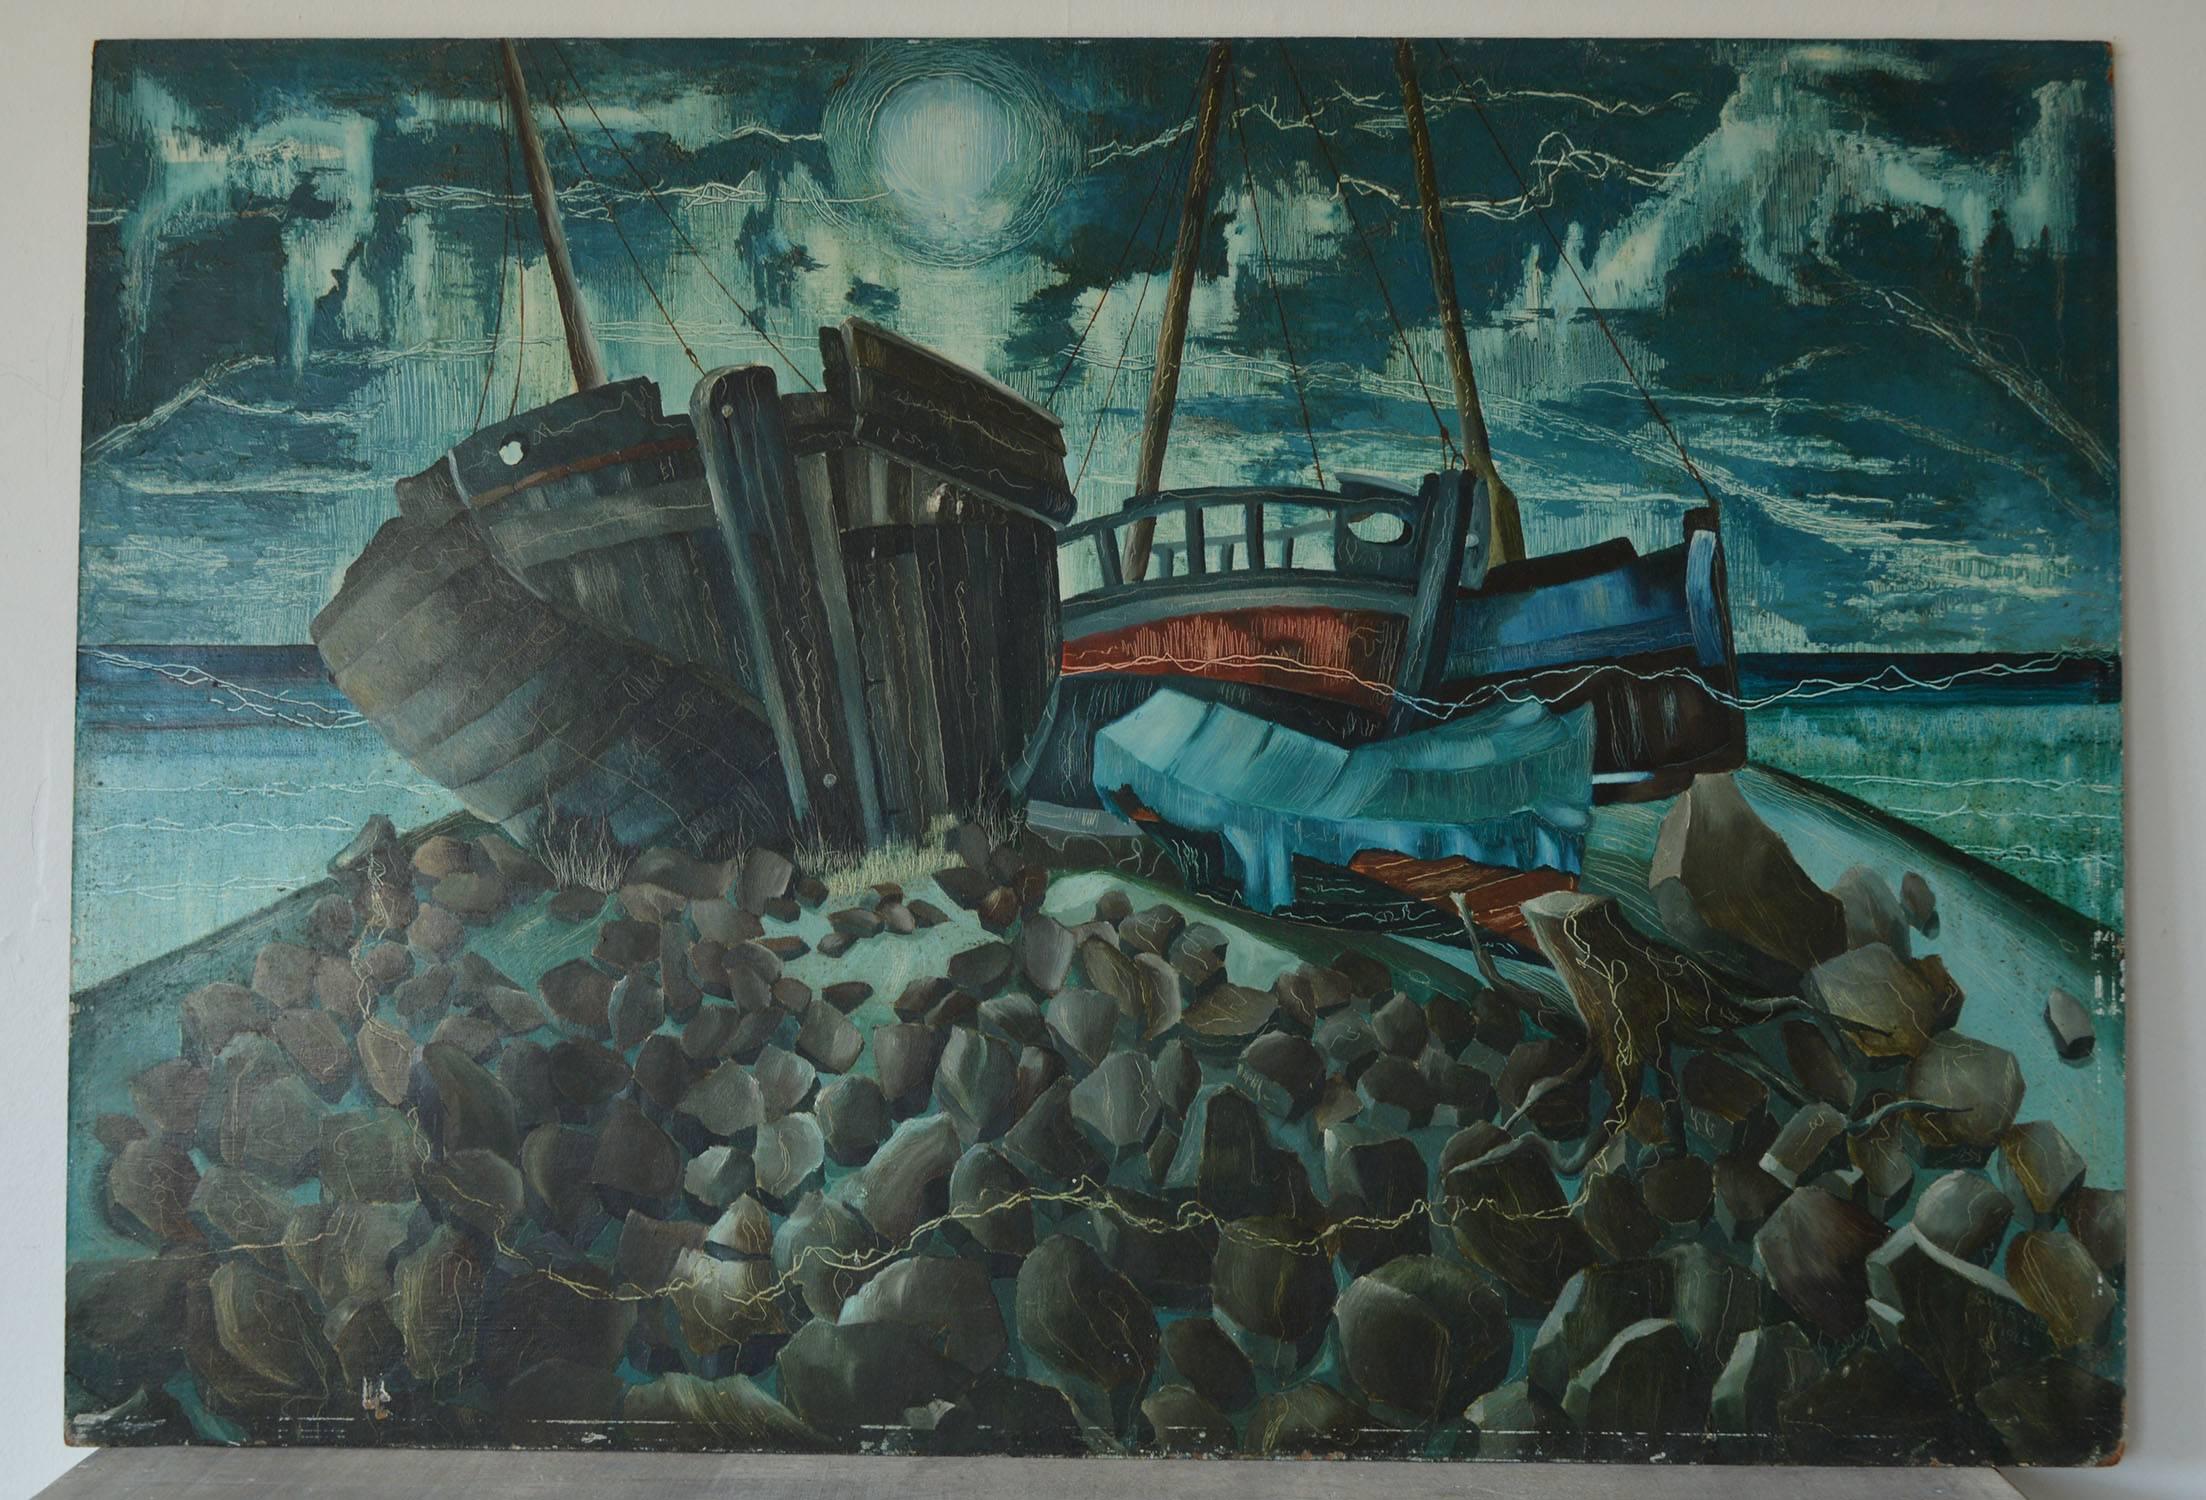 Wonderful painting of boats on a rocky shore. Very much in the style of Paul Nash.

Great colors and technique. I particularly like the way the artist has scratched the paint surface to reveal an amazing striated effect.

Signed and dated bottom